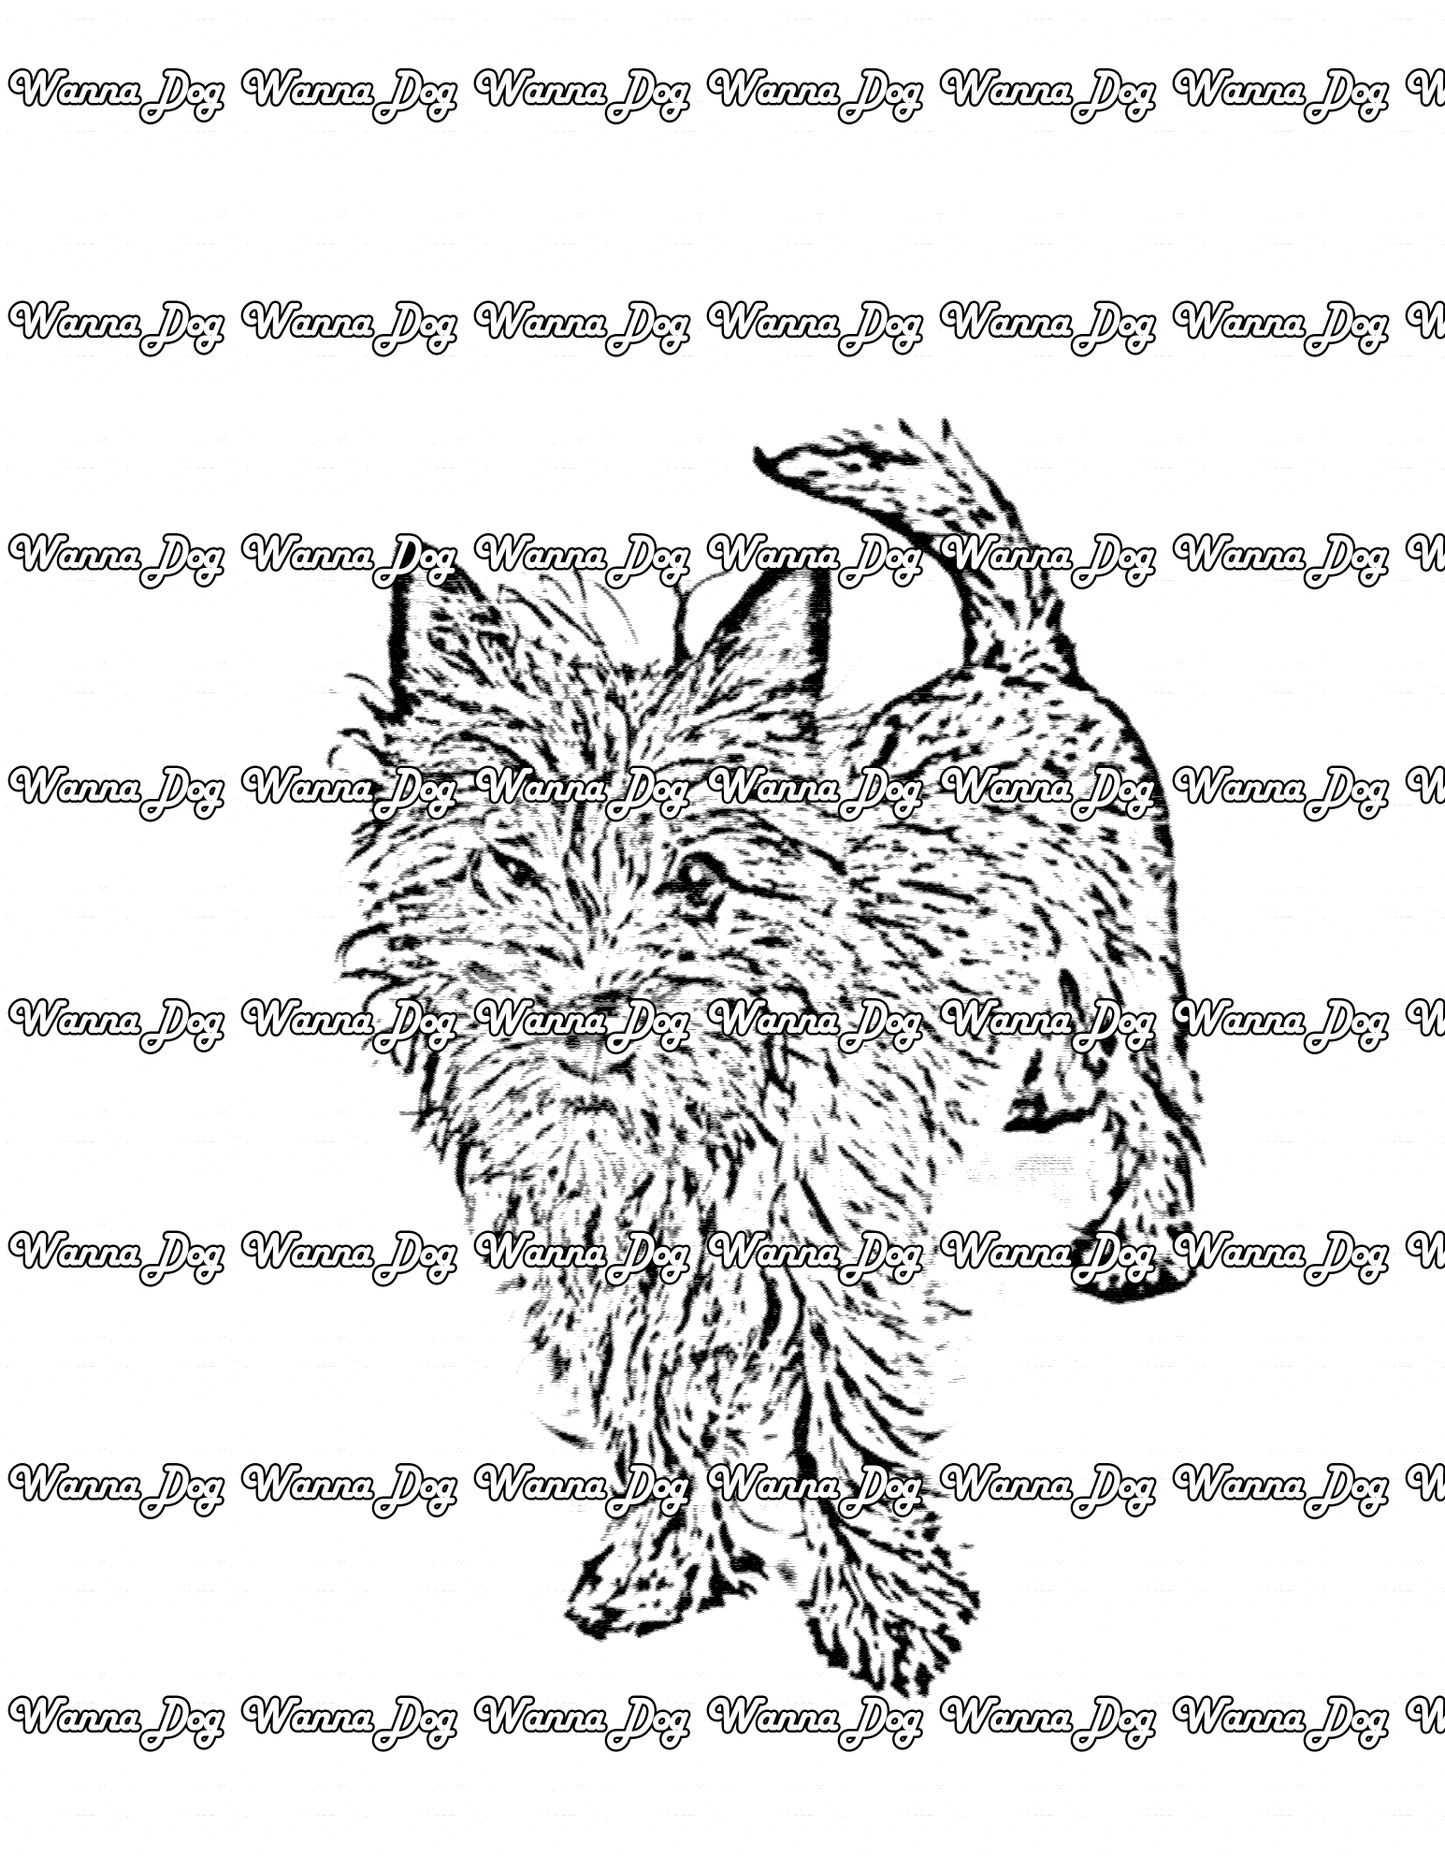 Cairn Terrier Coloring Page of a Cairn Terrier looking up at the camera